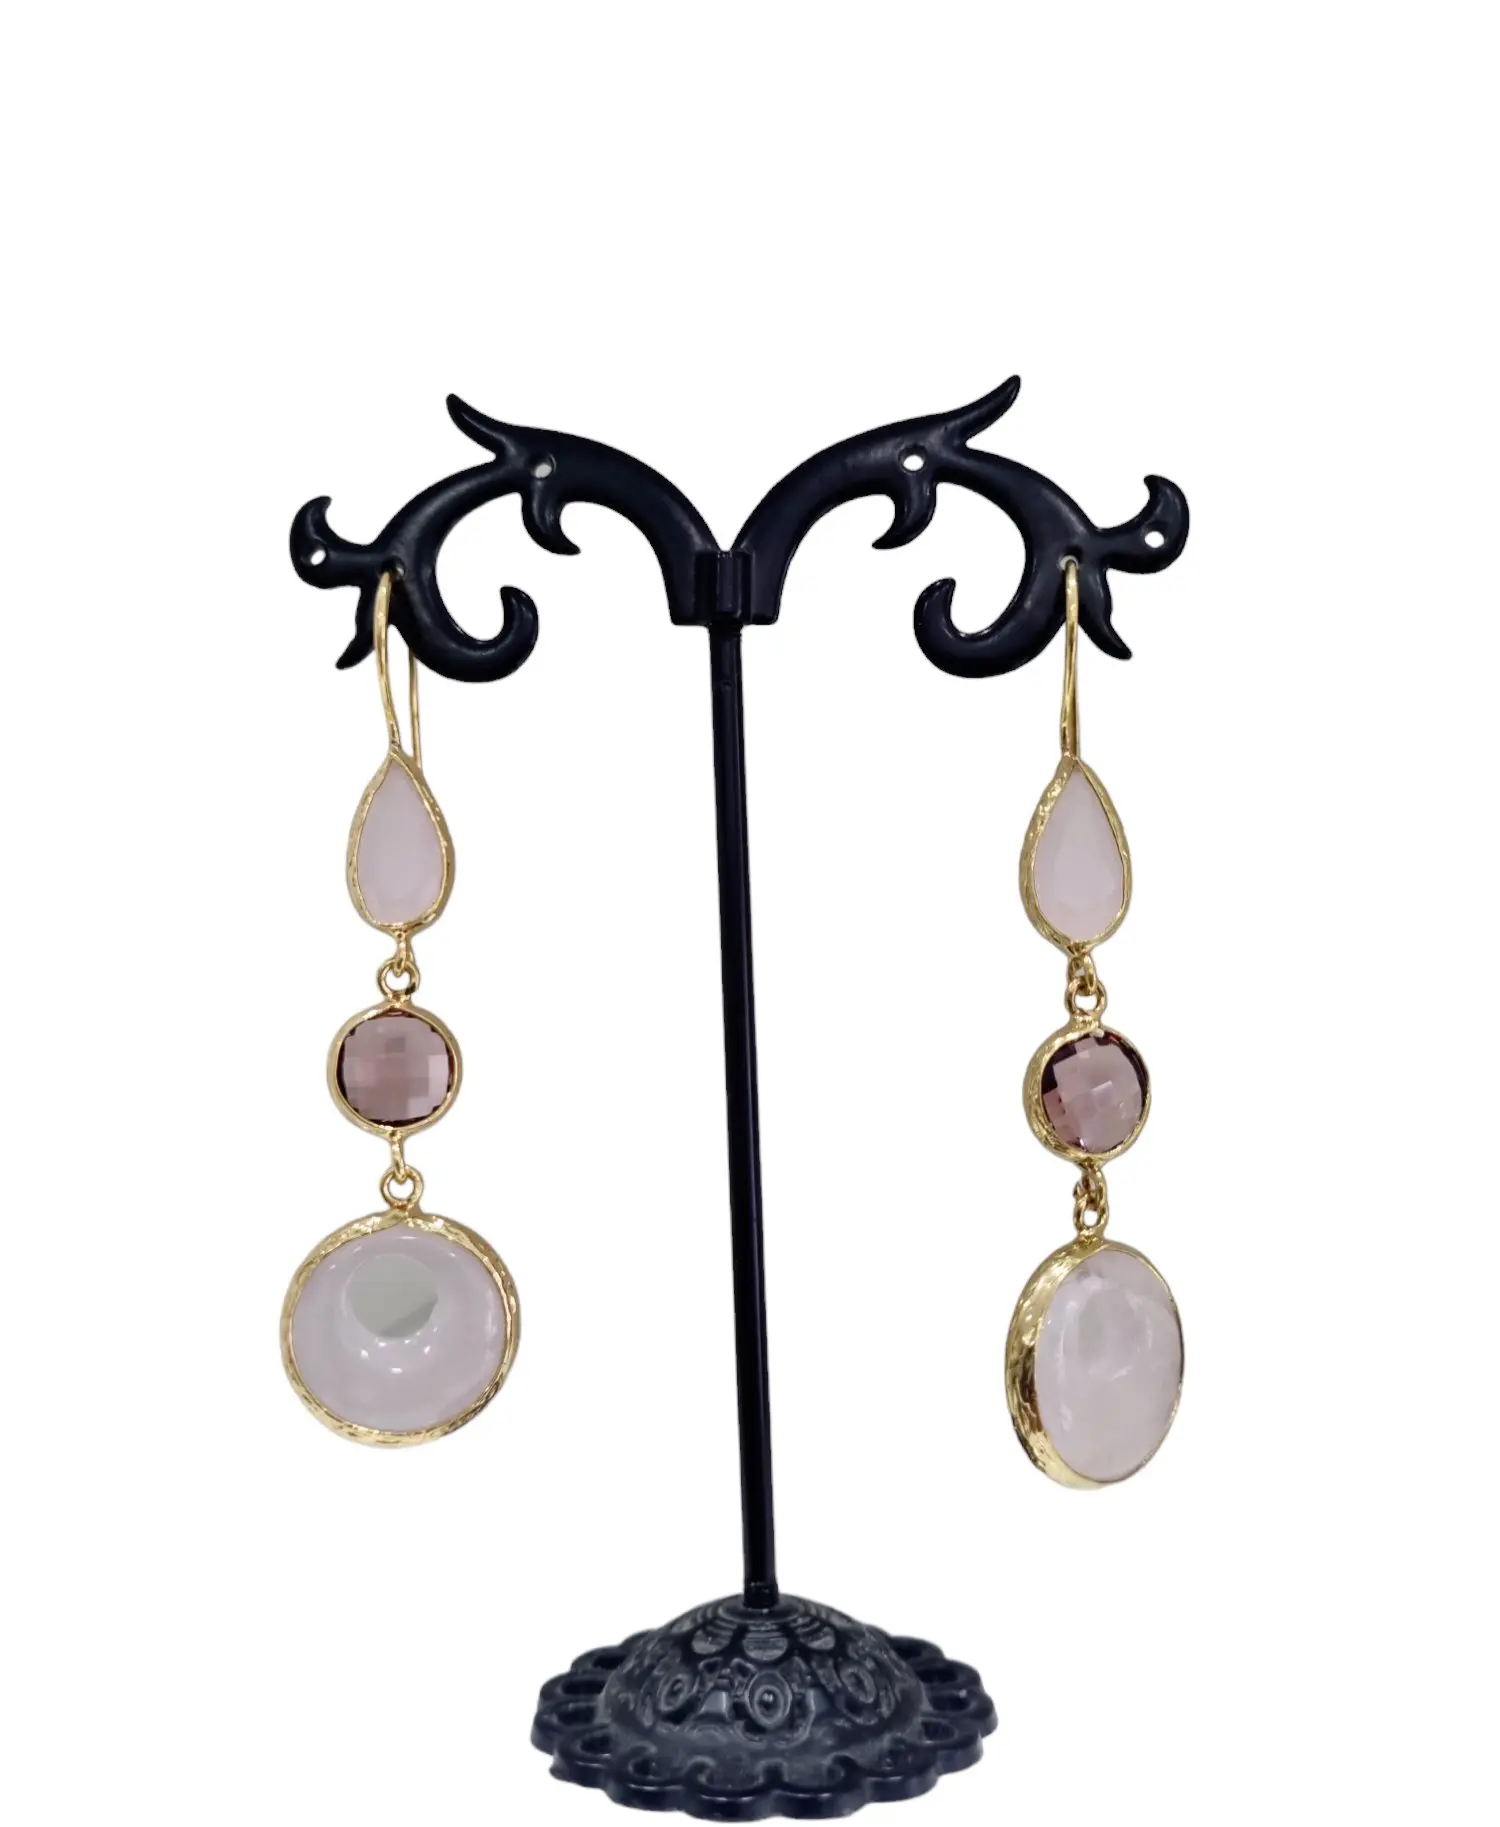 Rose quartz earrings surrounded by brass, elegant and refined. Length 6.5gr, weight 5.7gr.